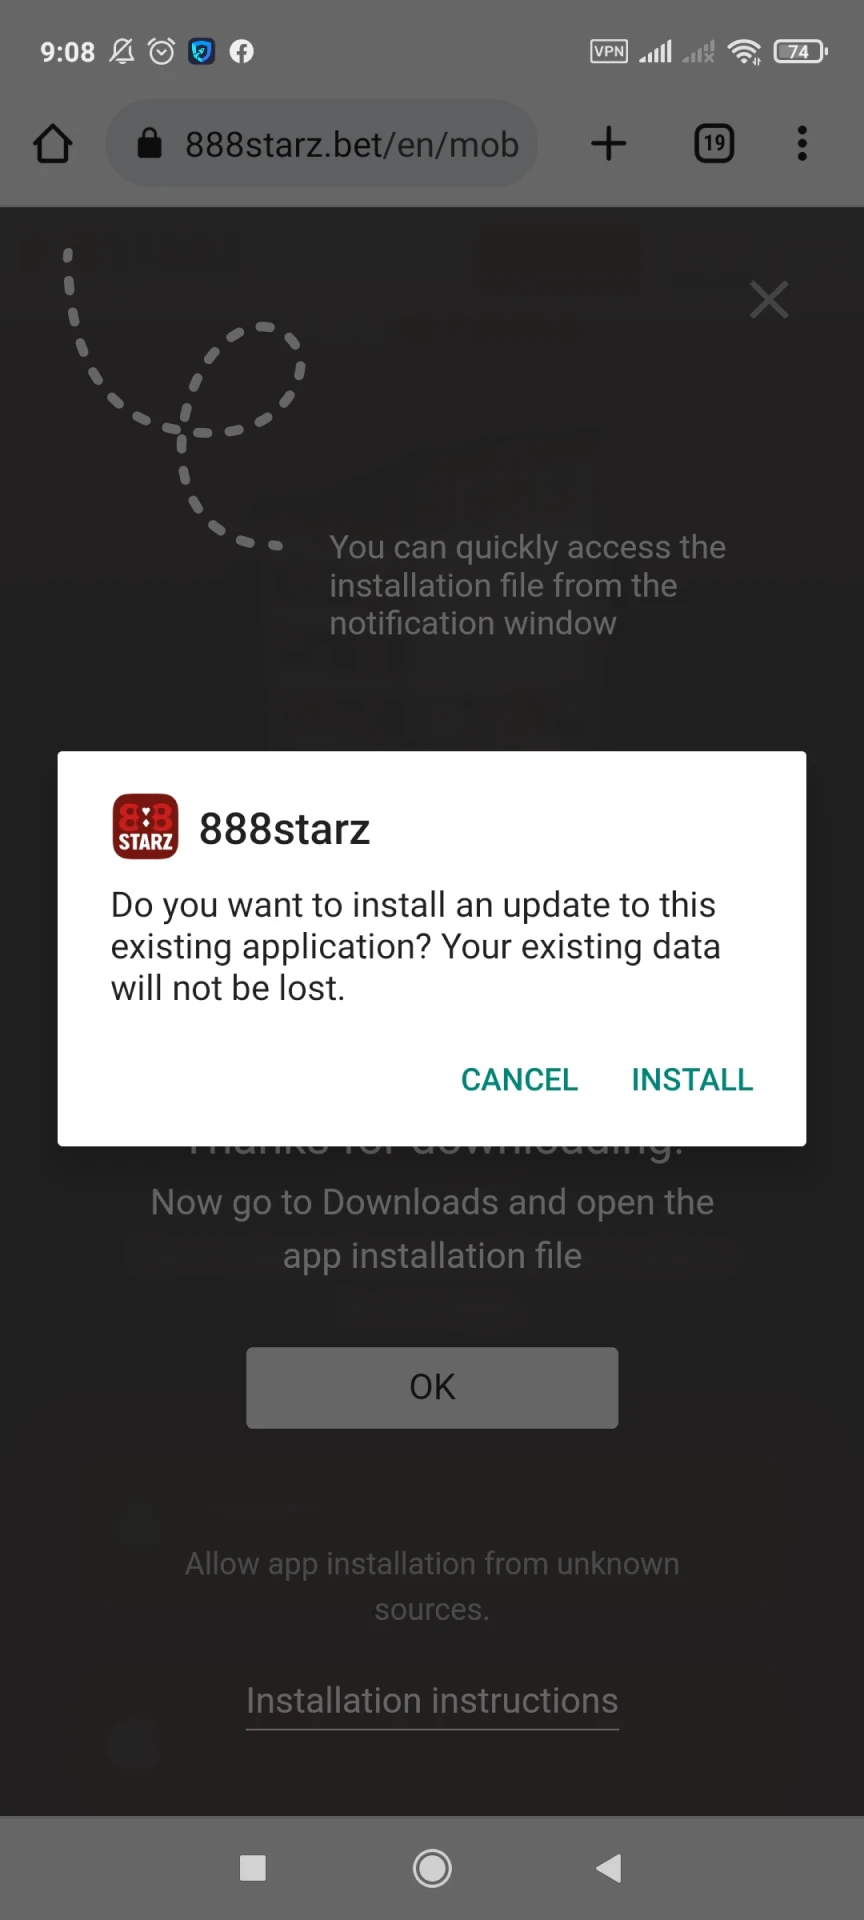 Start installing the application on Android.